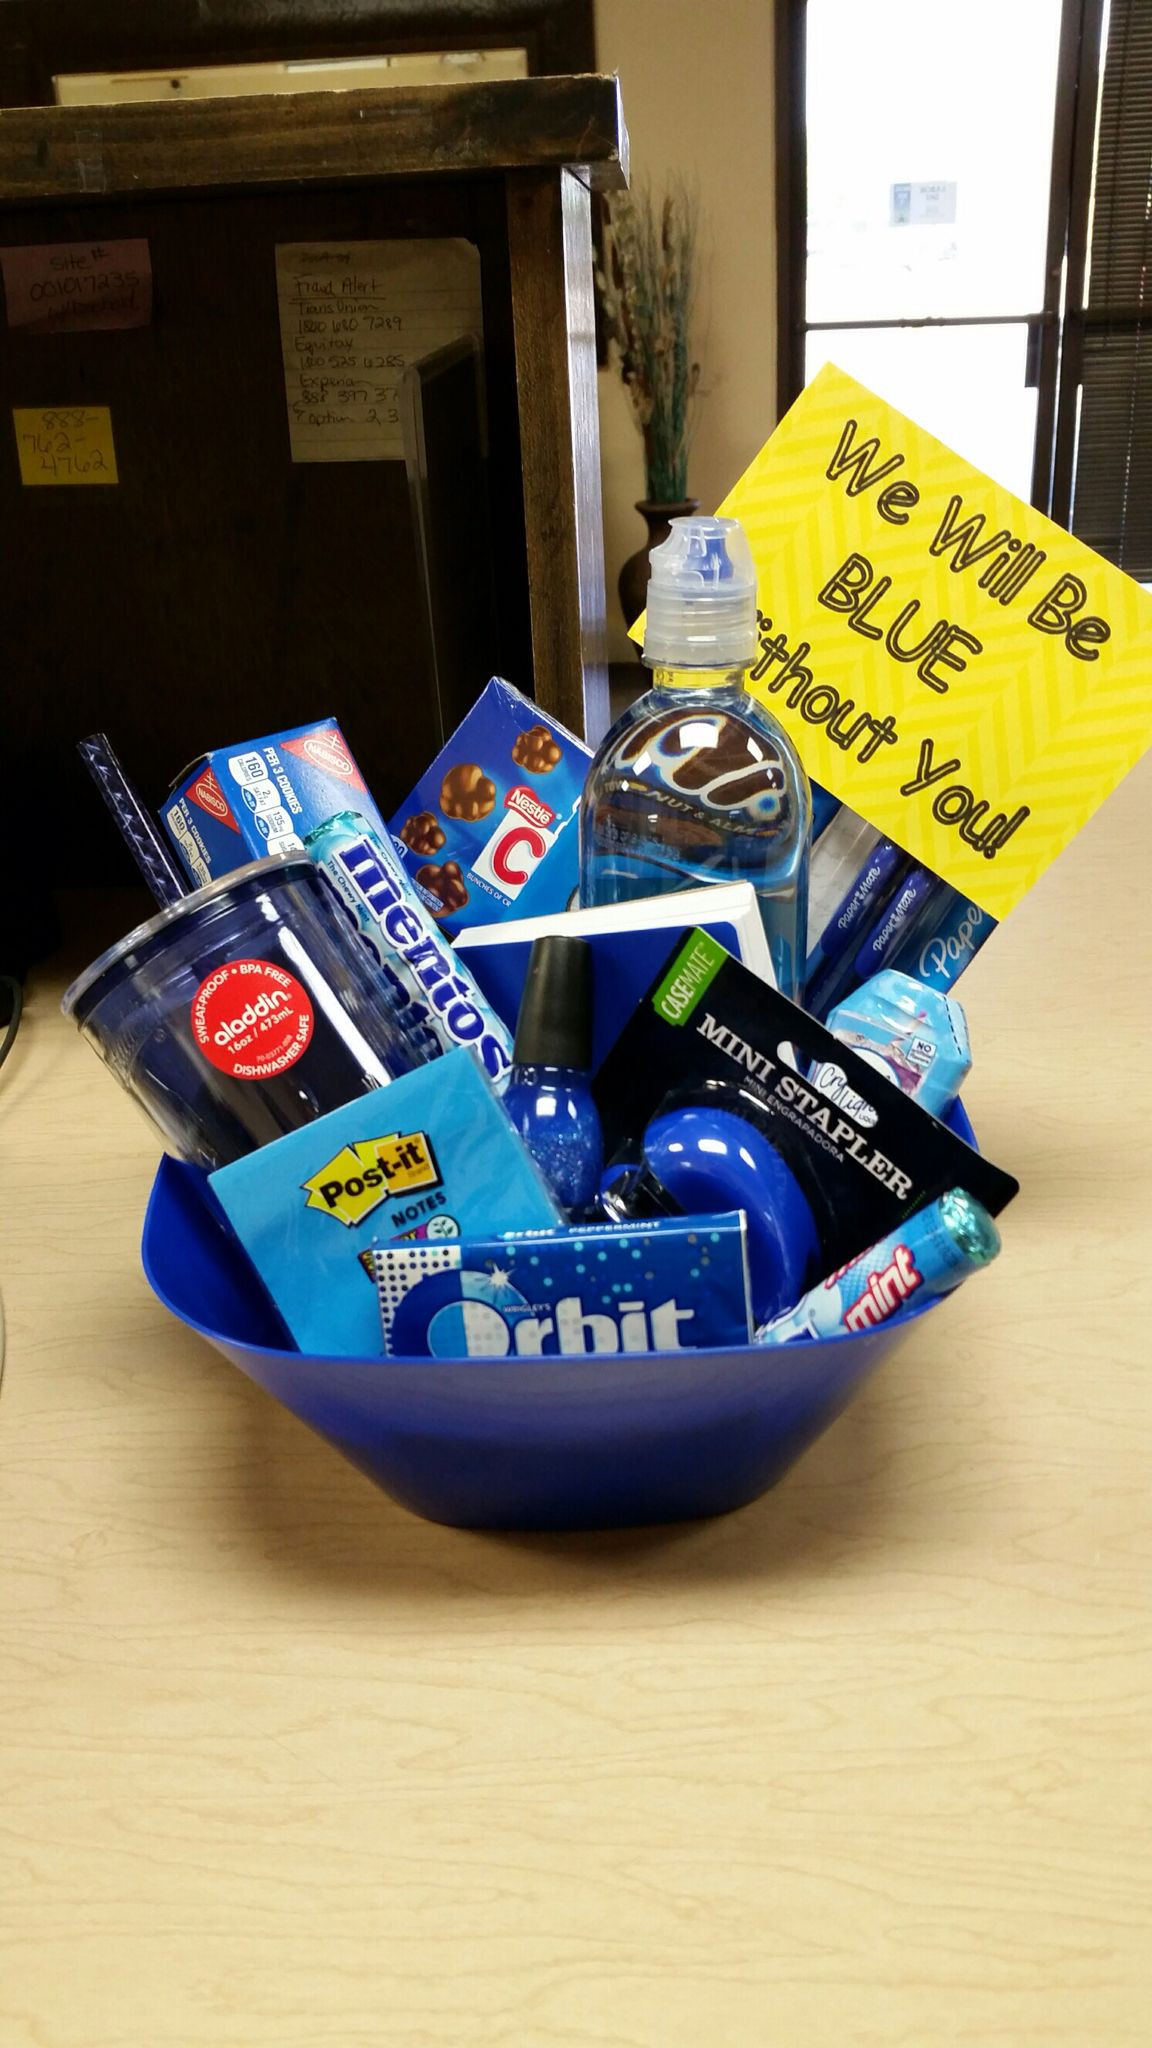 Gift Baskets For Coworkers Ideas
 75 Good Inexpensive Gifts for Coworkers